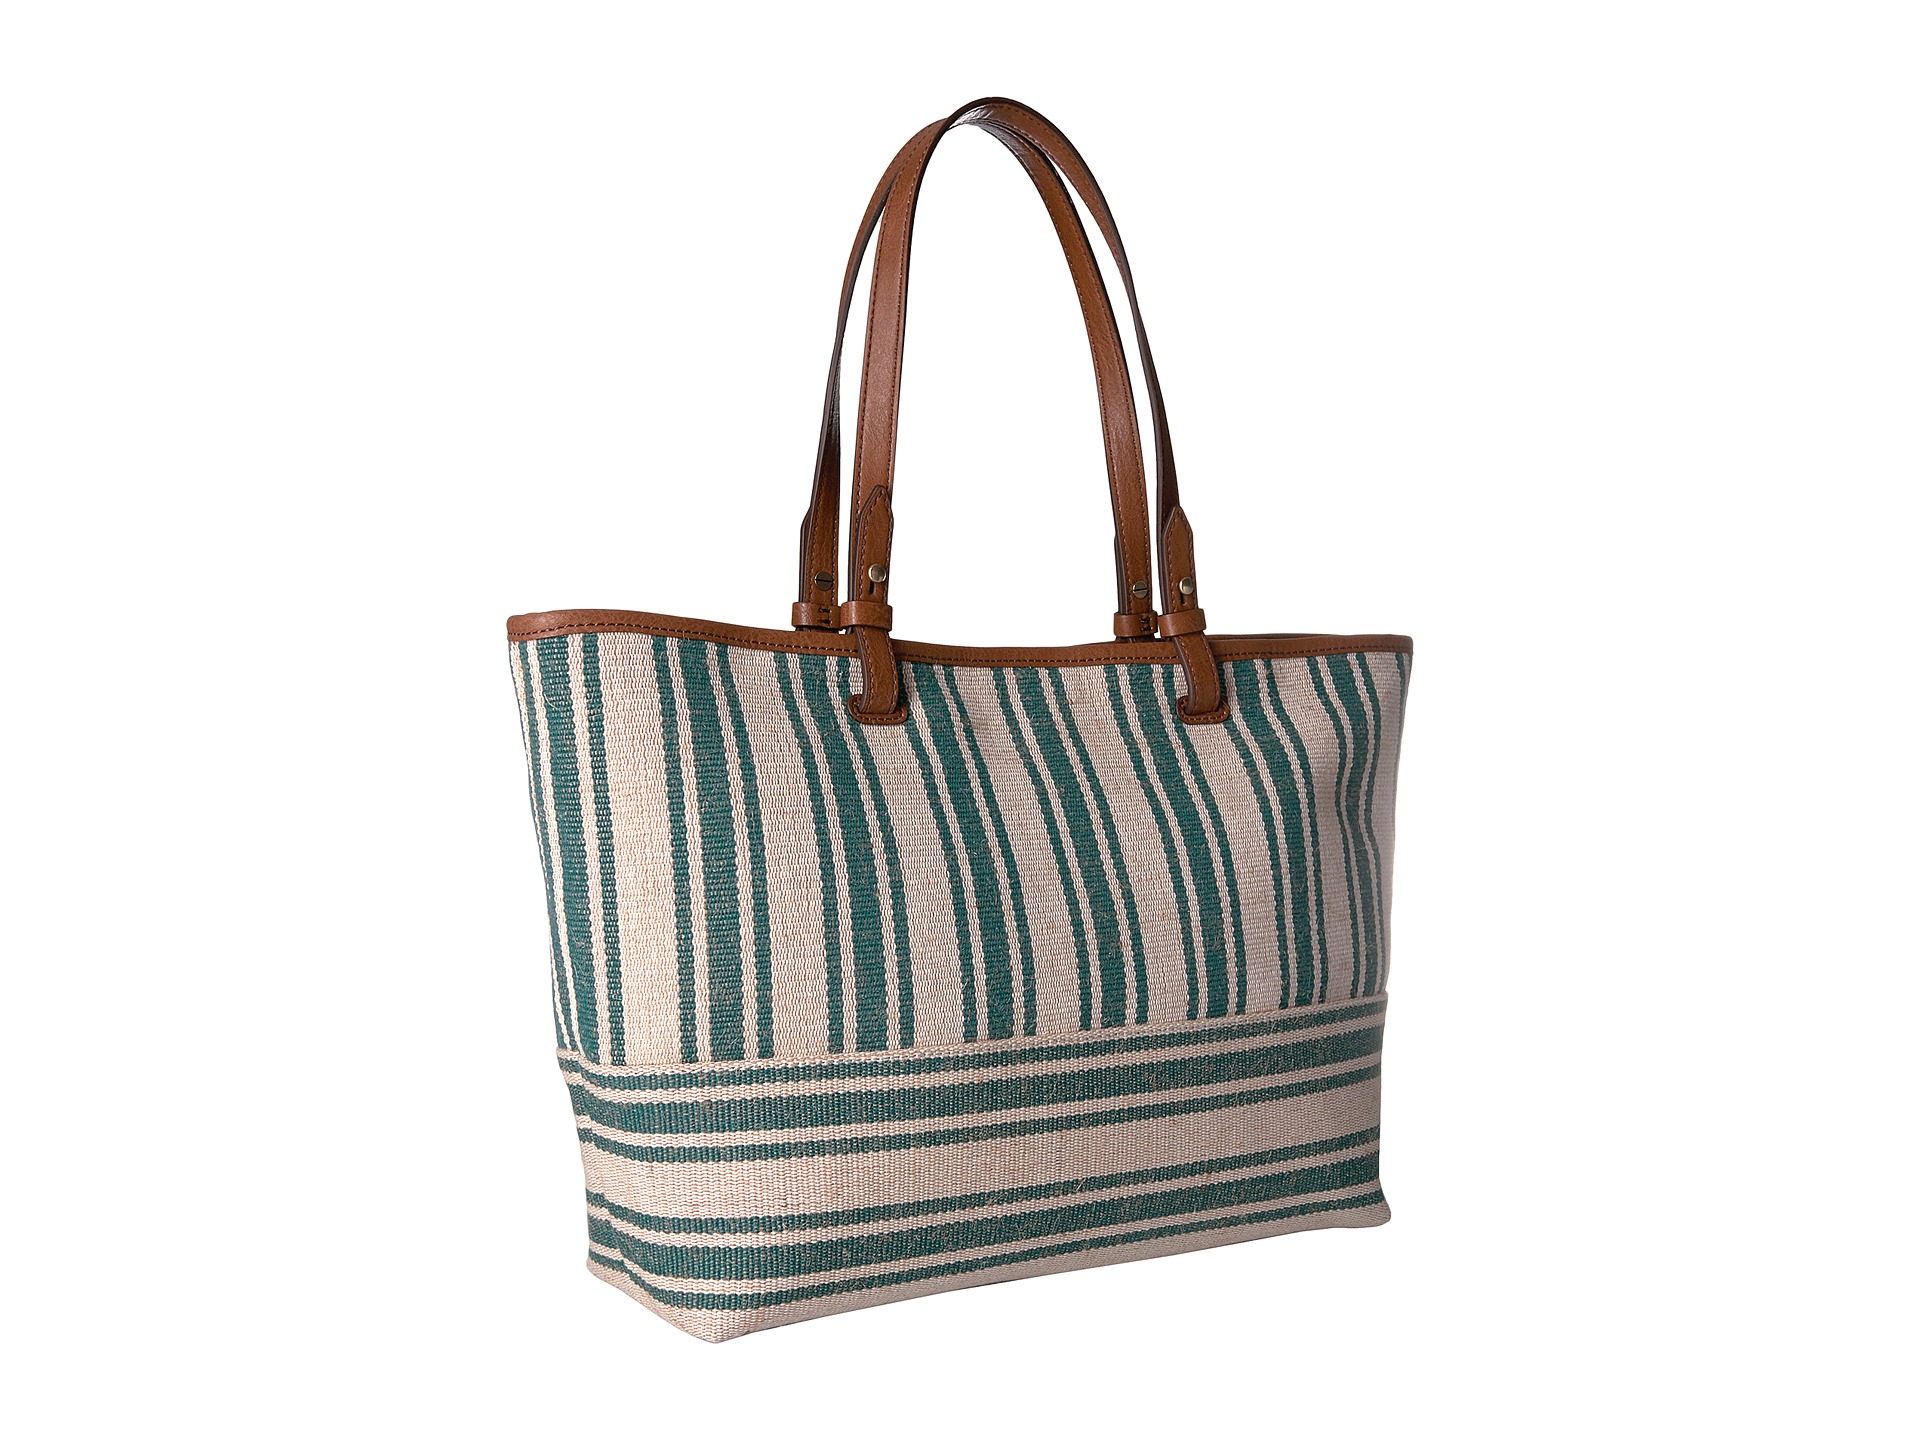 Fossil Rachel Tote - Zappos.com Free Shipping BOTH Ways